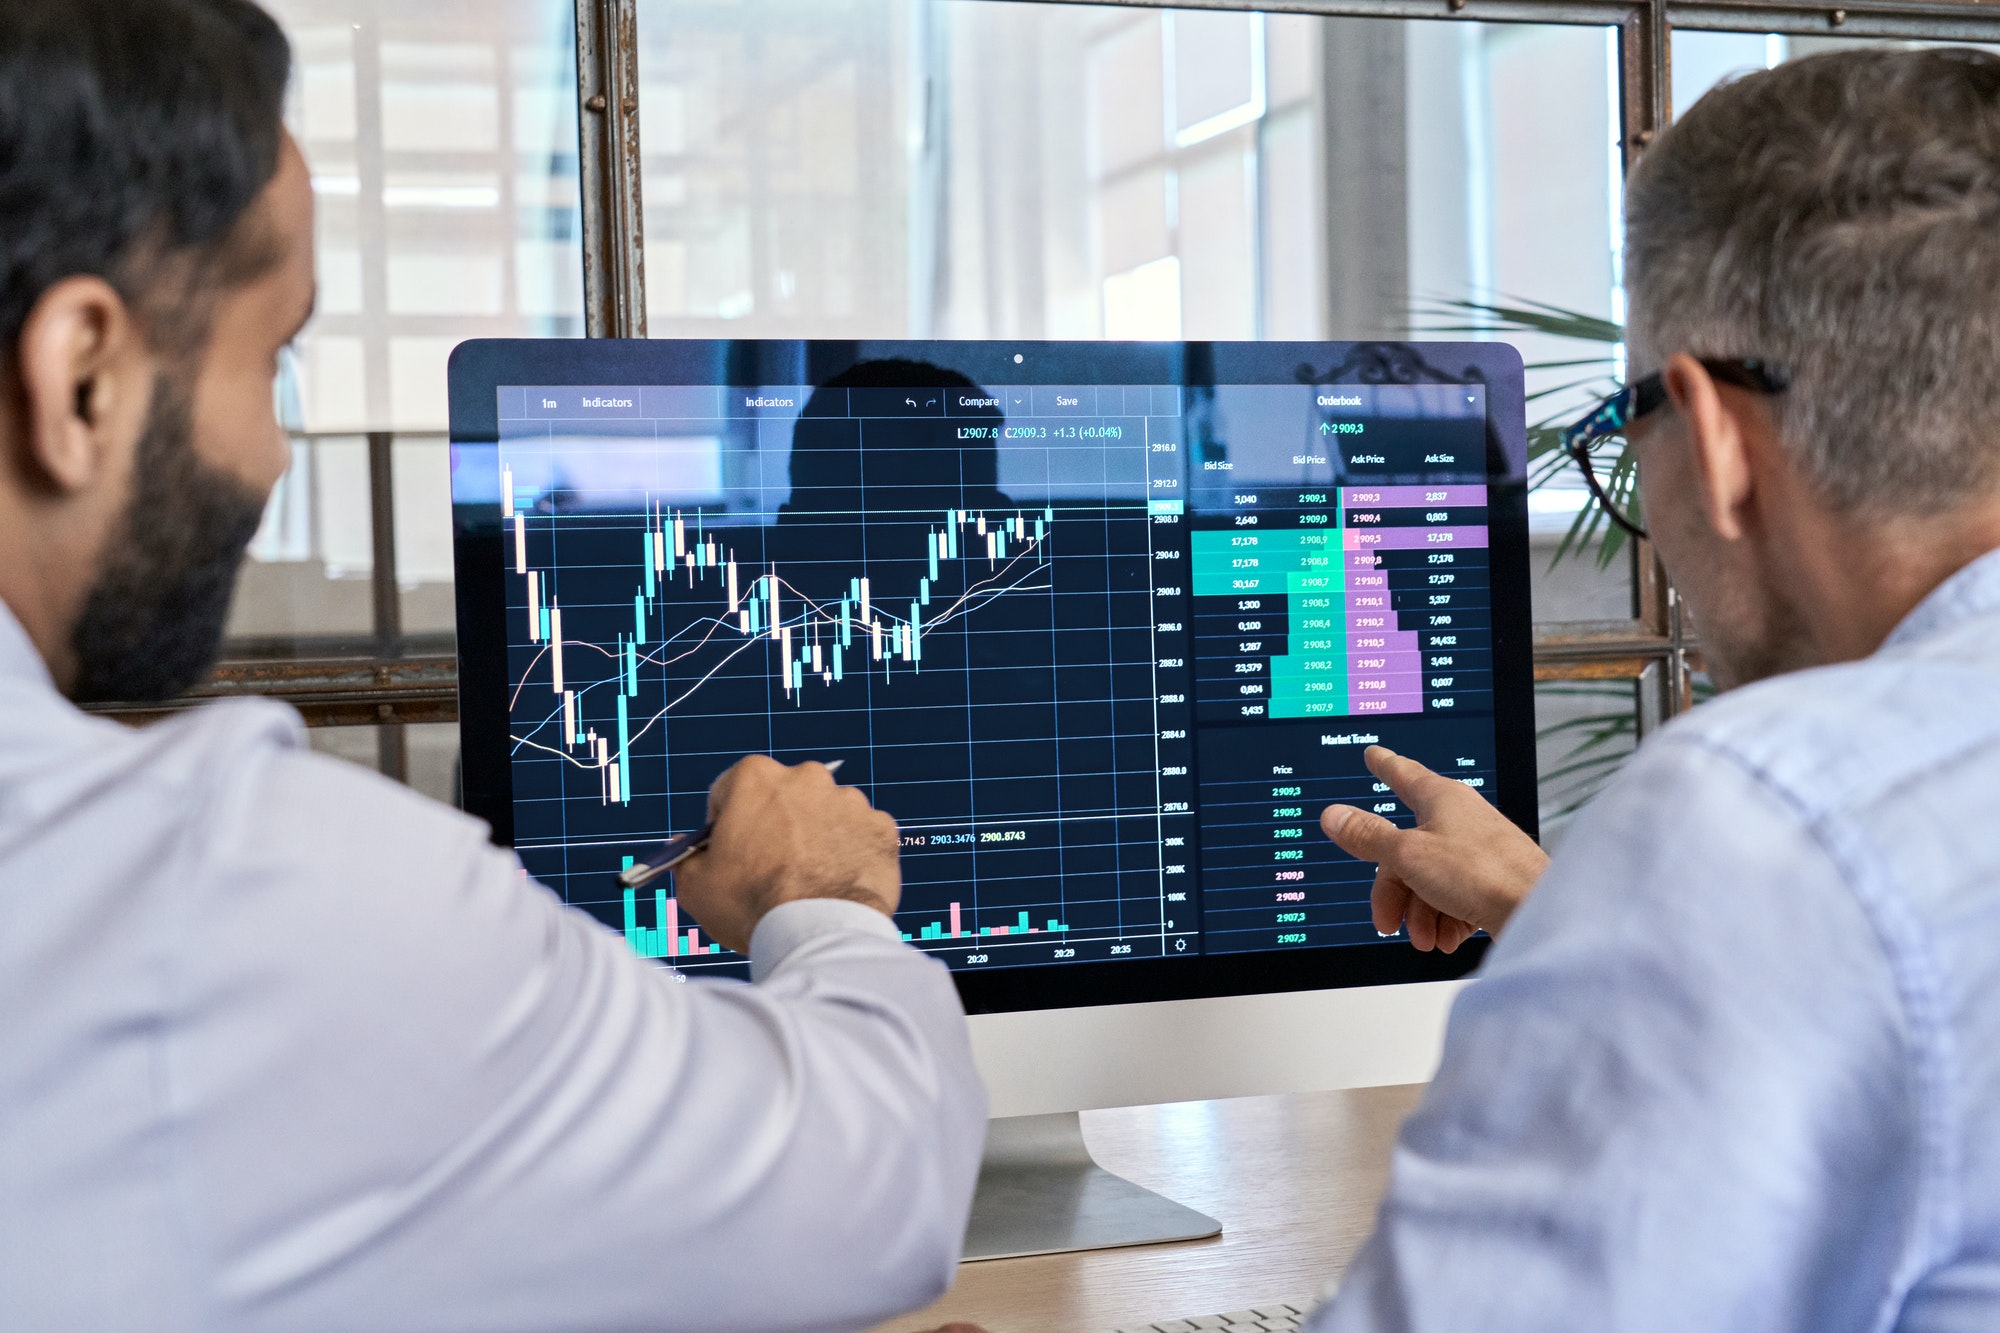 Two traders brokers stock exchange investors analyzing crypto trading charts.